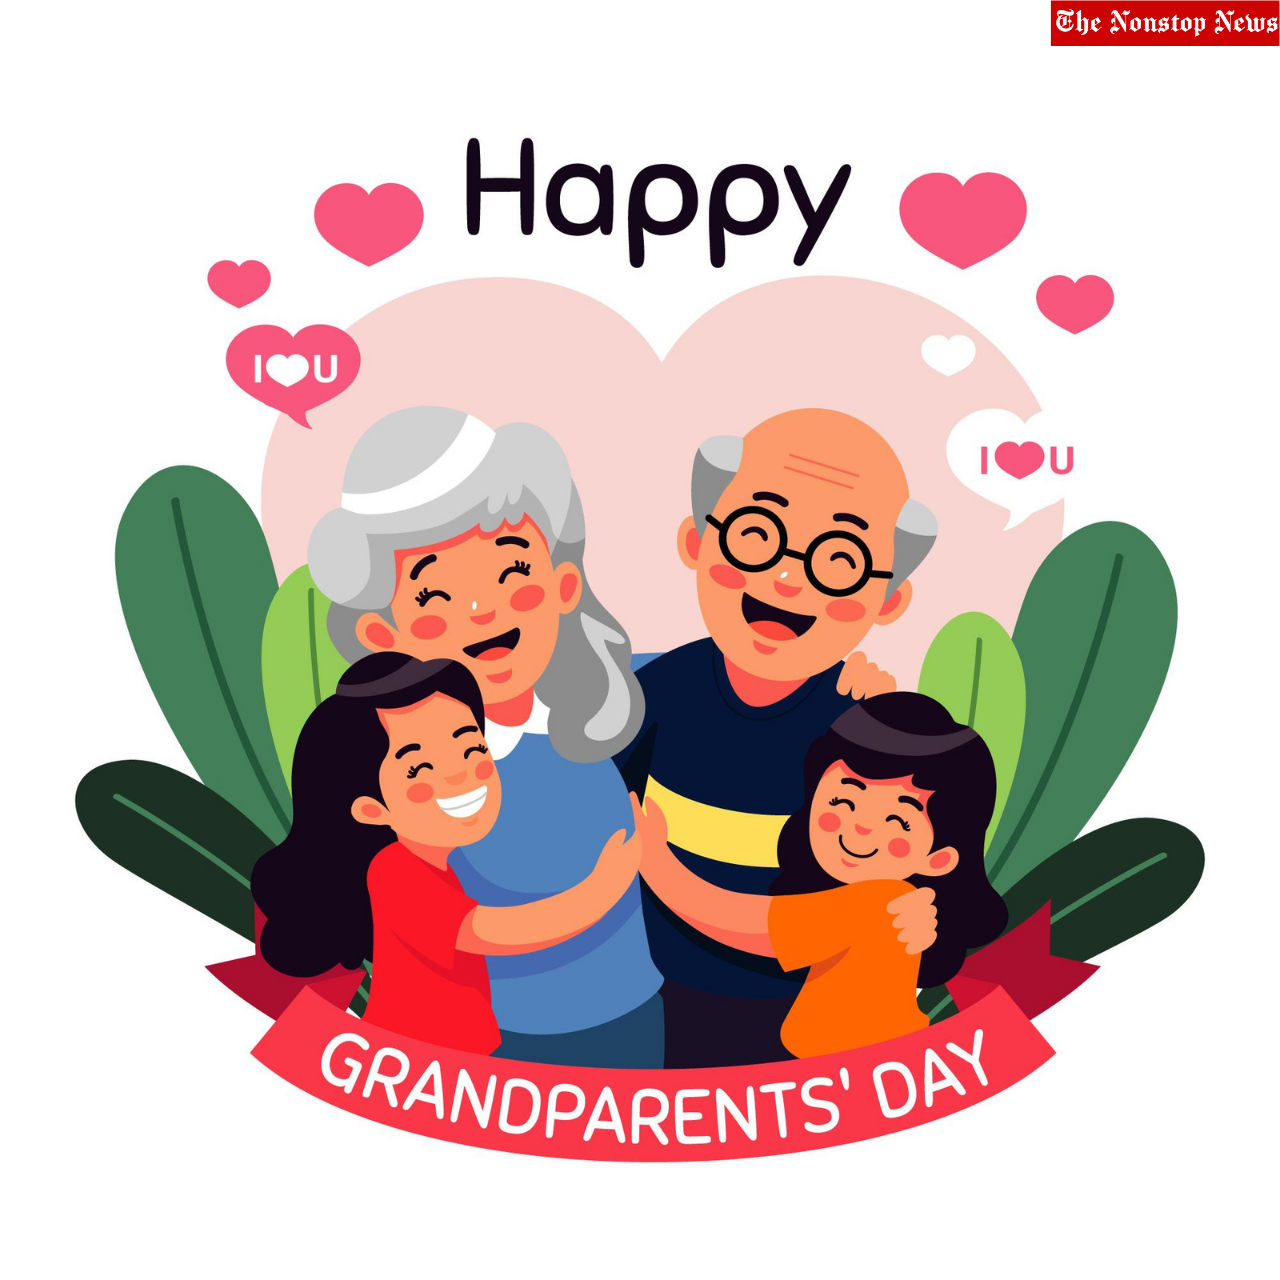 National Grandparents Day (US) 2021: Wishes, HD Images, Quotes, Messages, Stickers, Clipart, and Greetings to Share